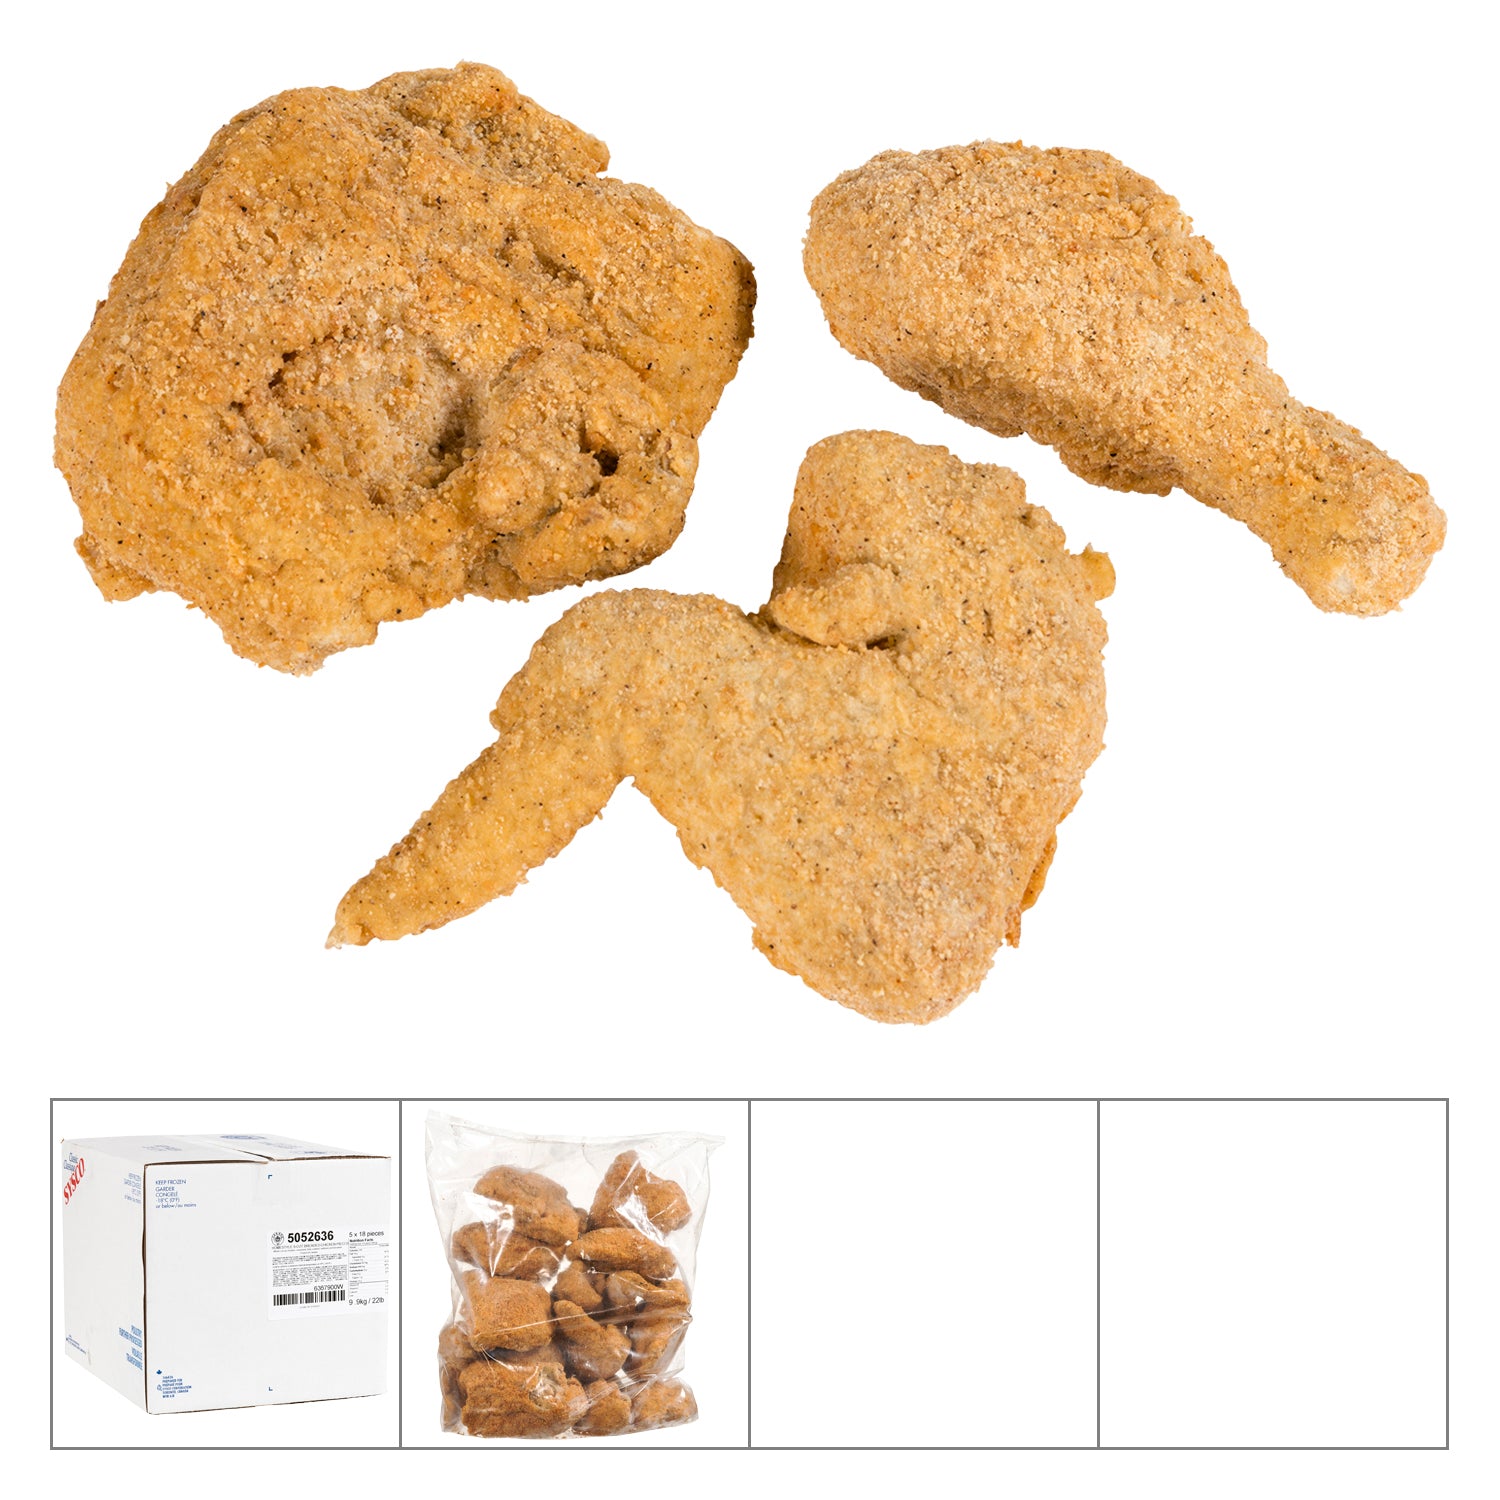 Sysco Classic Homestyle Breaded Crispy Chicken Fully Cooked 5x18ct [$1.88/ea]